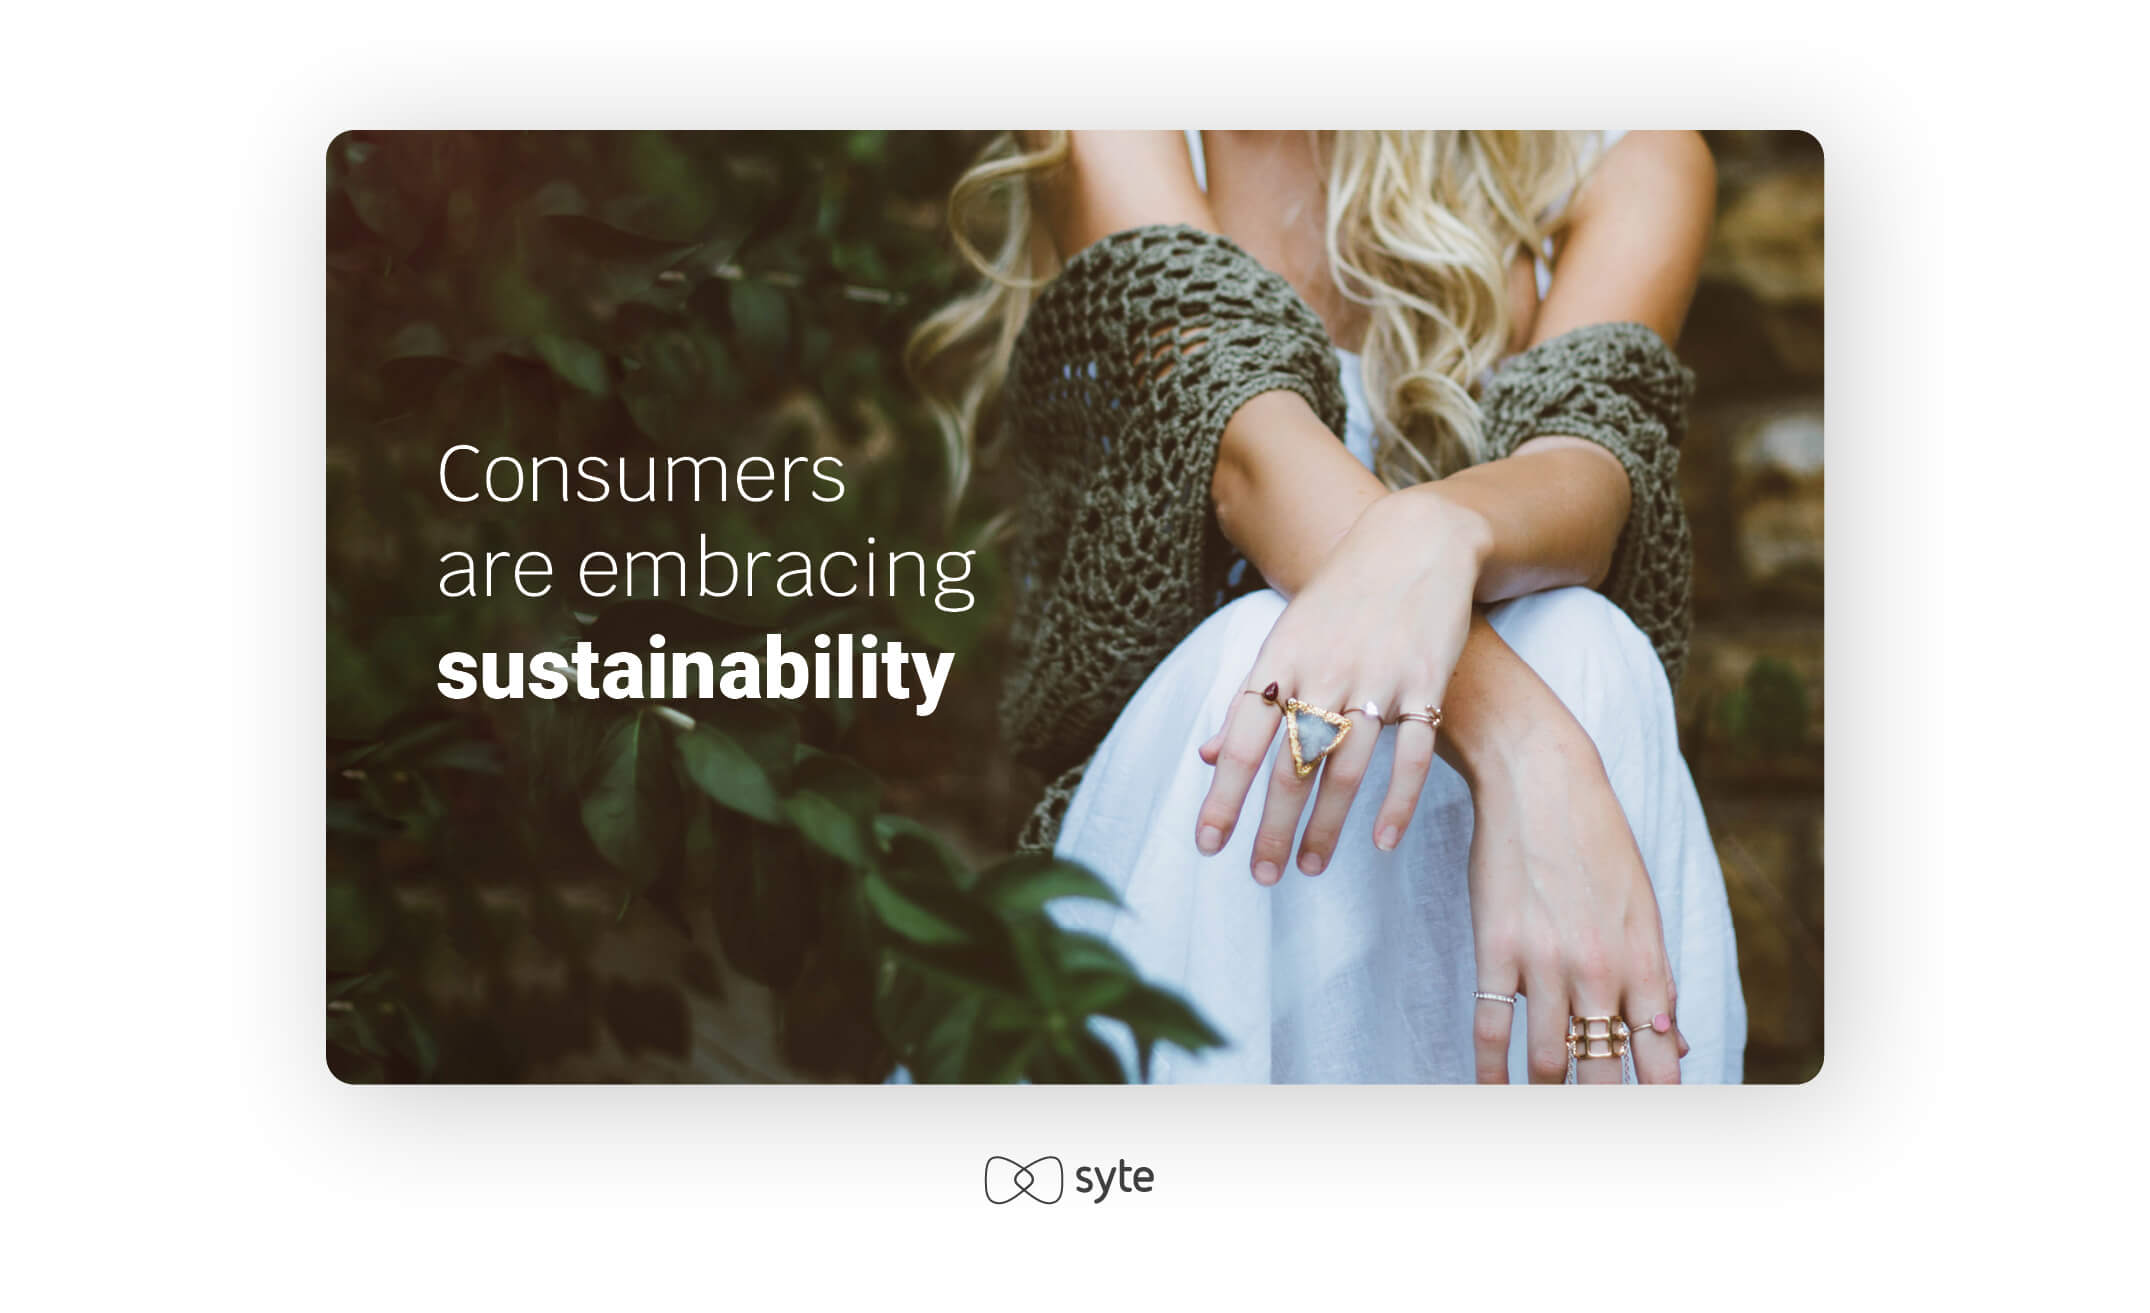 Consumers are embracing sustainability